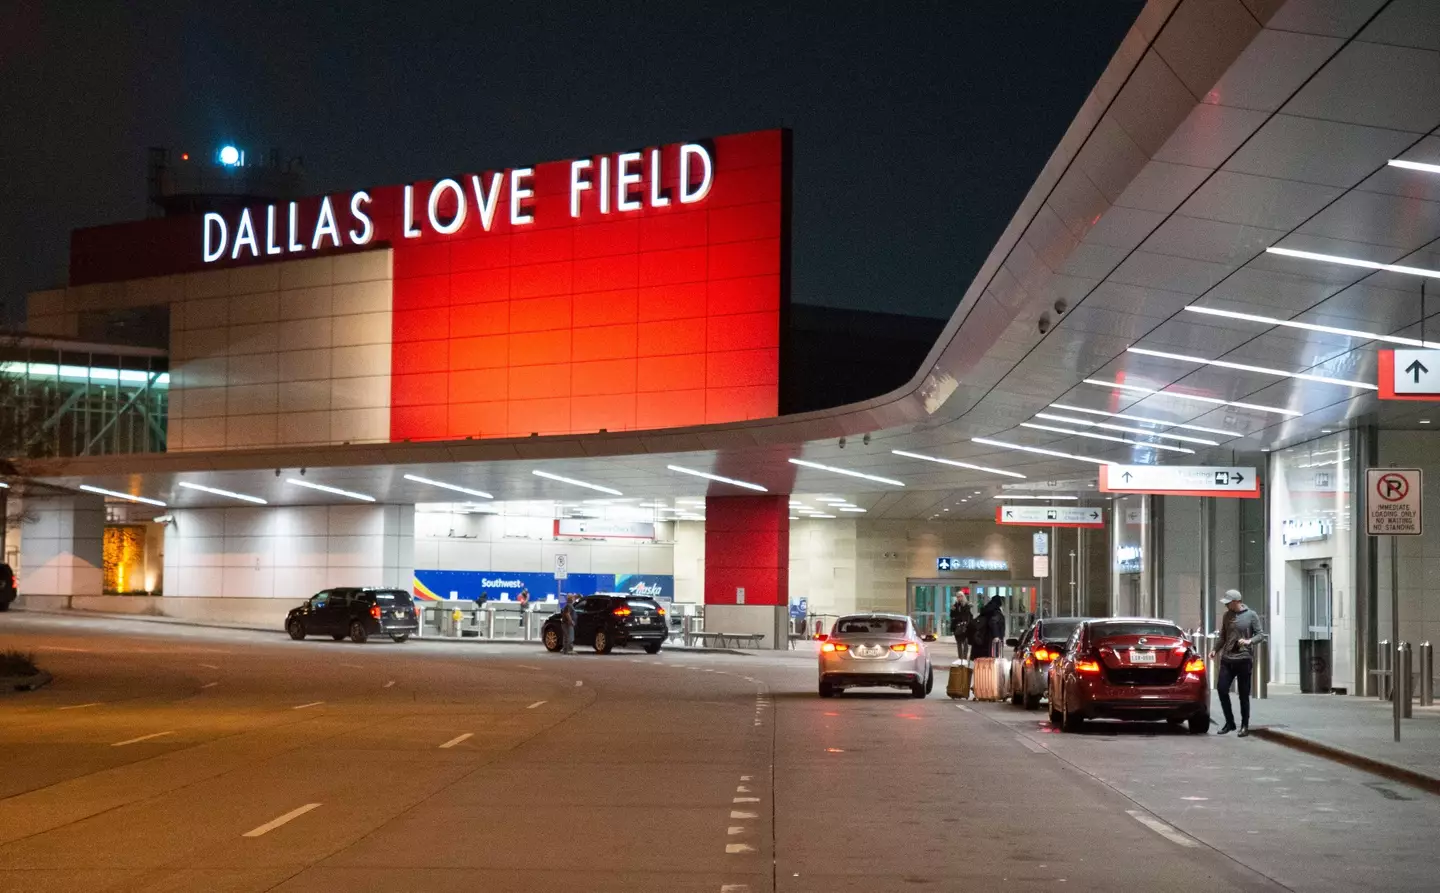 A woman allegedly opened fire at Dallas Love Field Airport today.